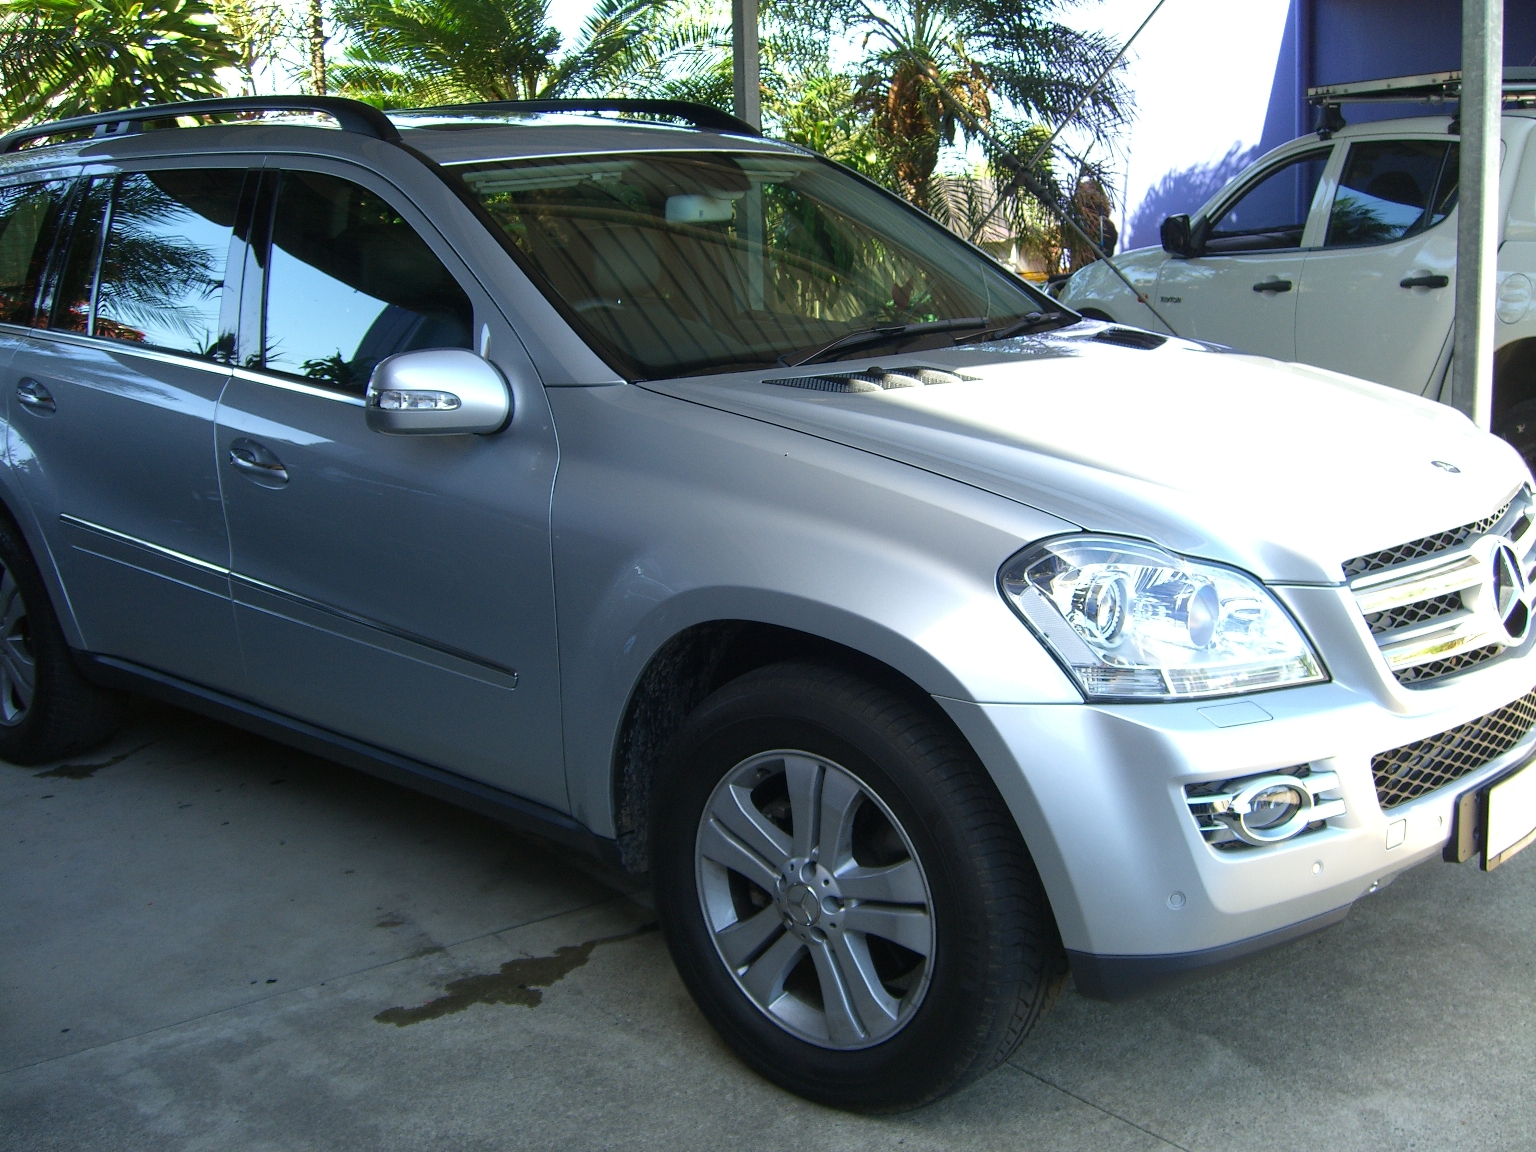 Mercedes Benz GL500 rear seat DVD and reverse camera upgrade